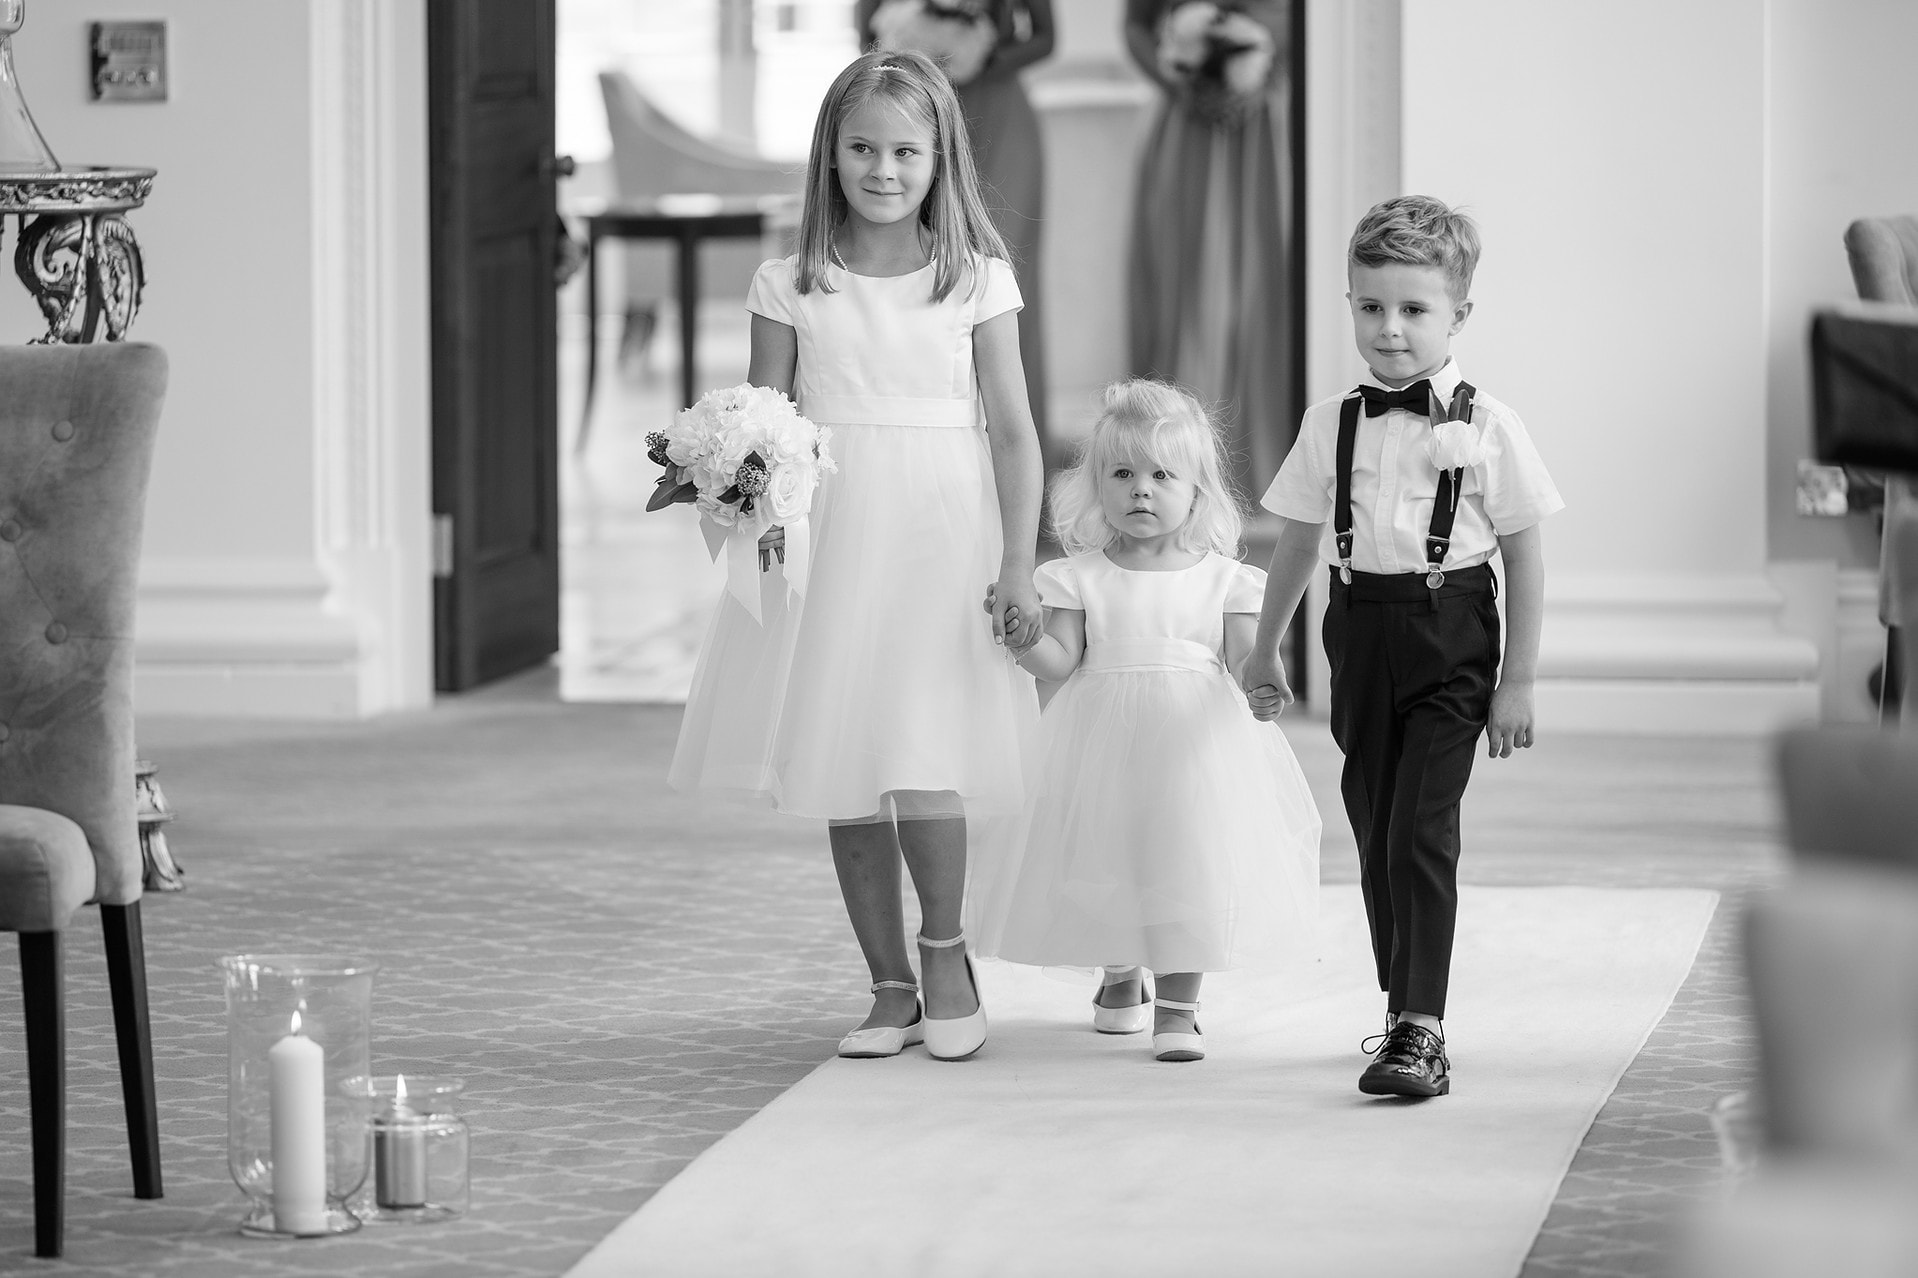 Flower girls and pageboy walking down the aisle